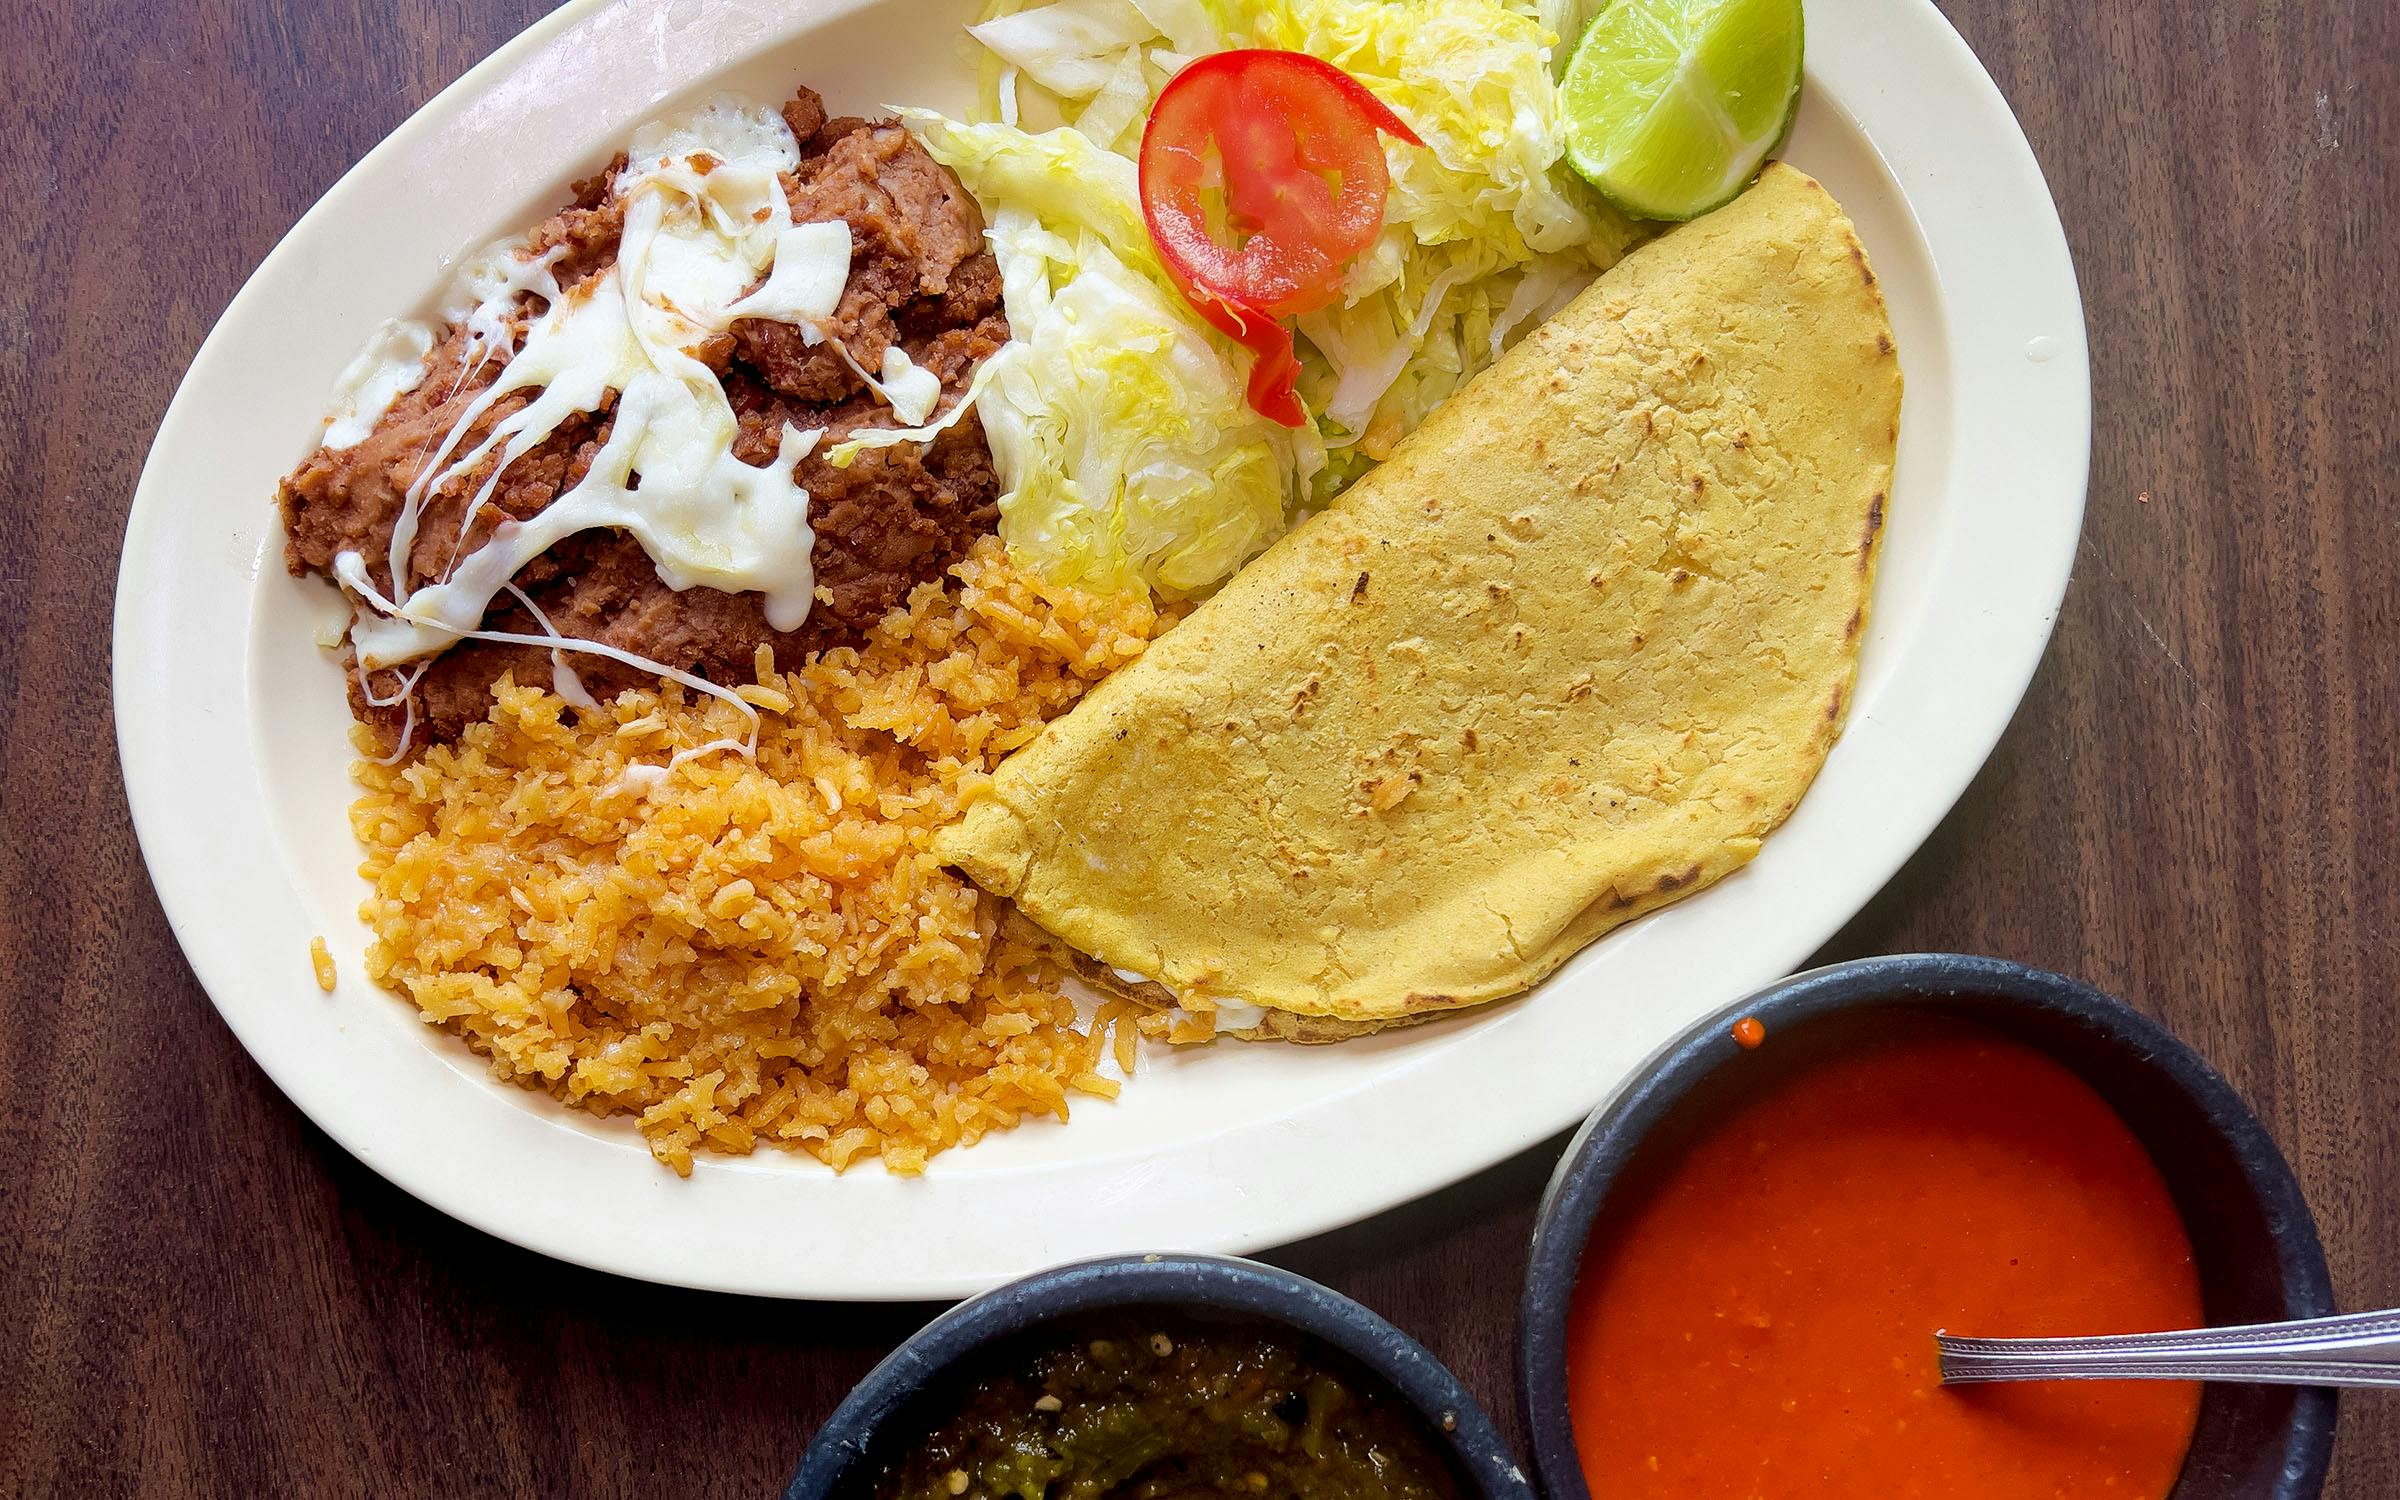 This Persevering Taquera’s West Texas Restaurant Feels Like Your Abuelita’s Kitchen